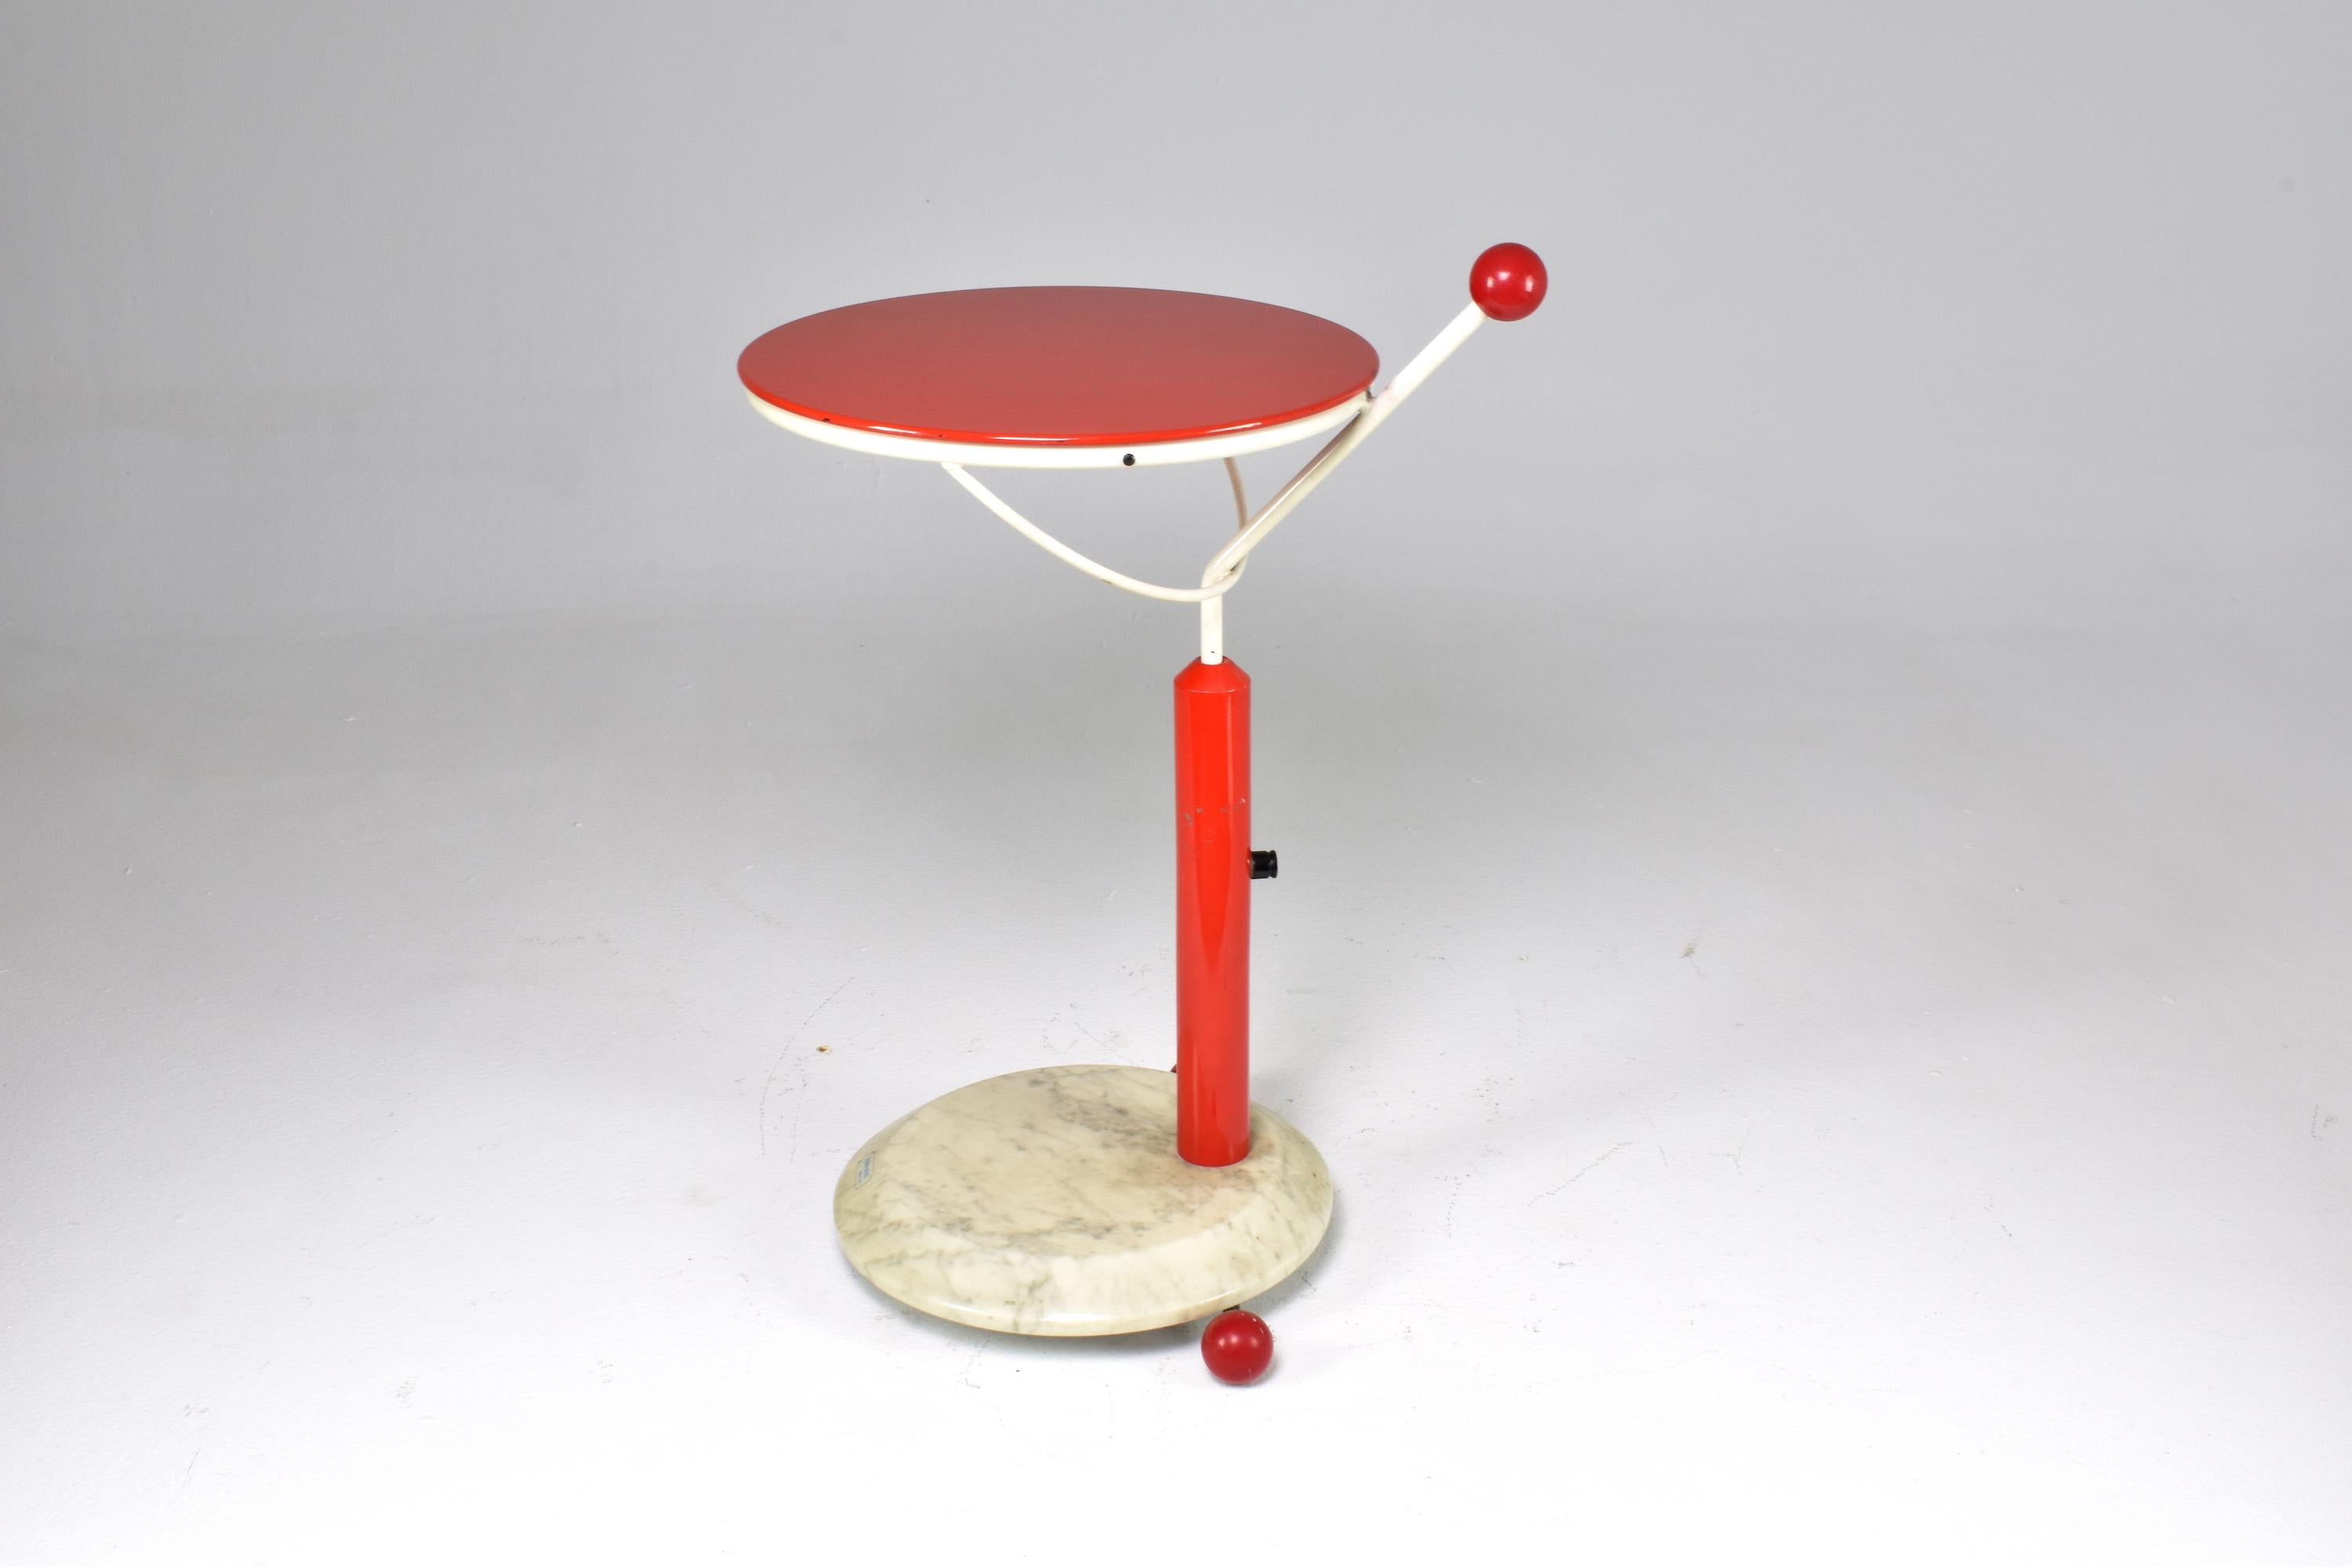 A fantastic 1980's rolling cart composed of a white carrare marble base, red synthetic wheels and stem, a white metal frame, and a red swiveling tray. The cart is designed for maneuverability, with a conveniently placed handle boasting a plastic